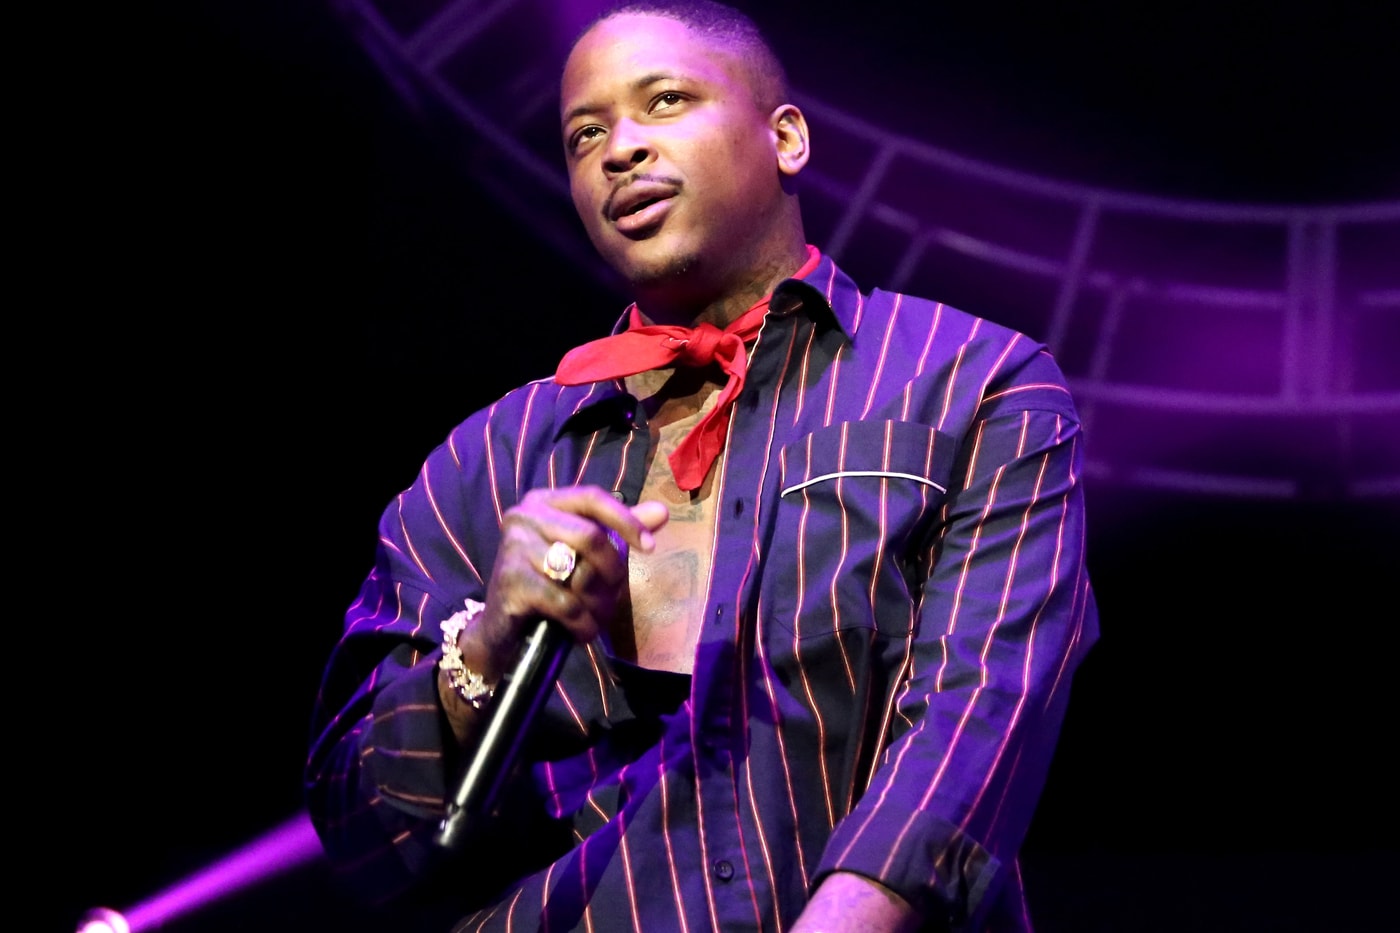 YG Breaks $60,000 USD Contract for "FDT" F**k Donald Trump Concerts Videos San Diego State University Greenfest